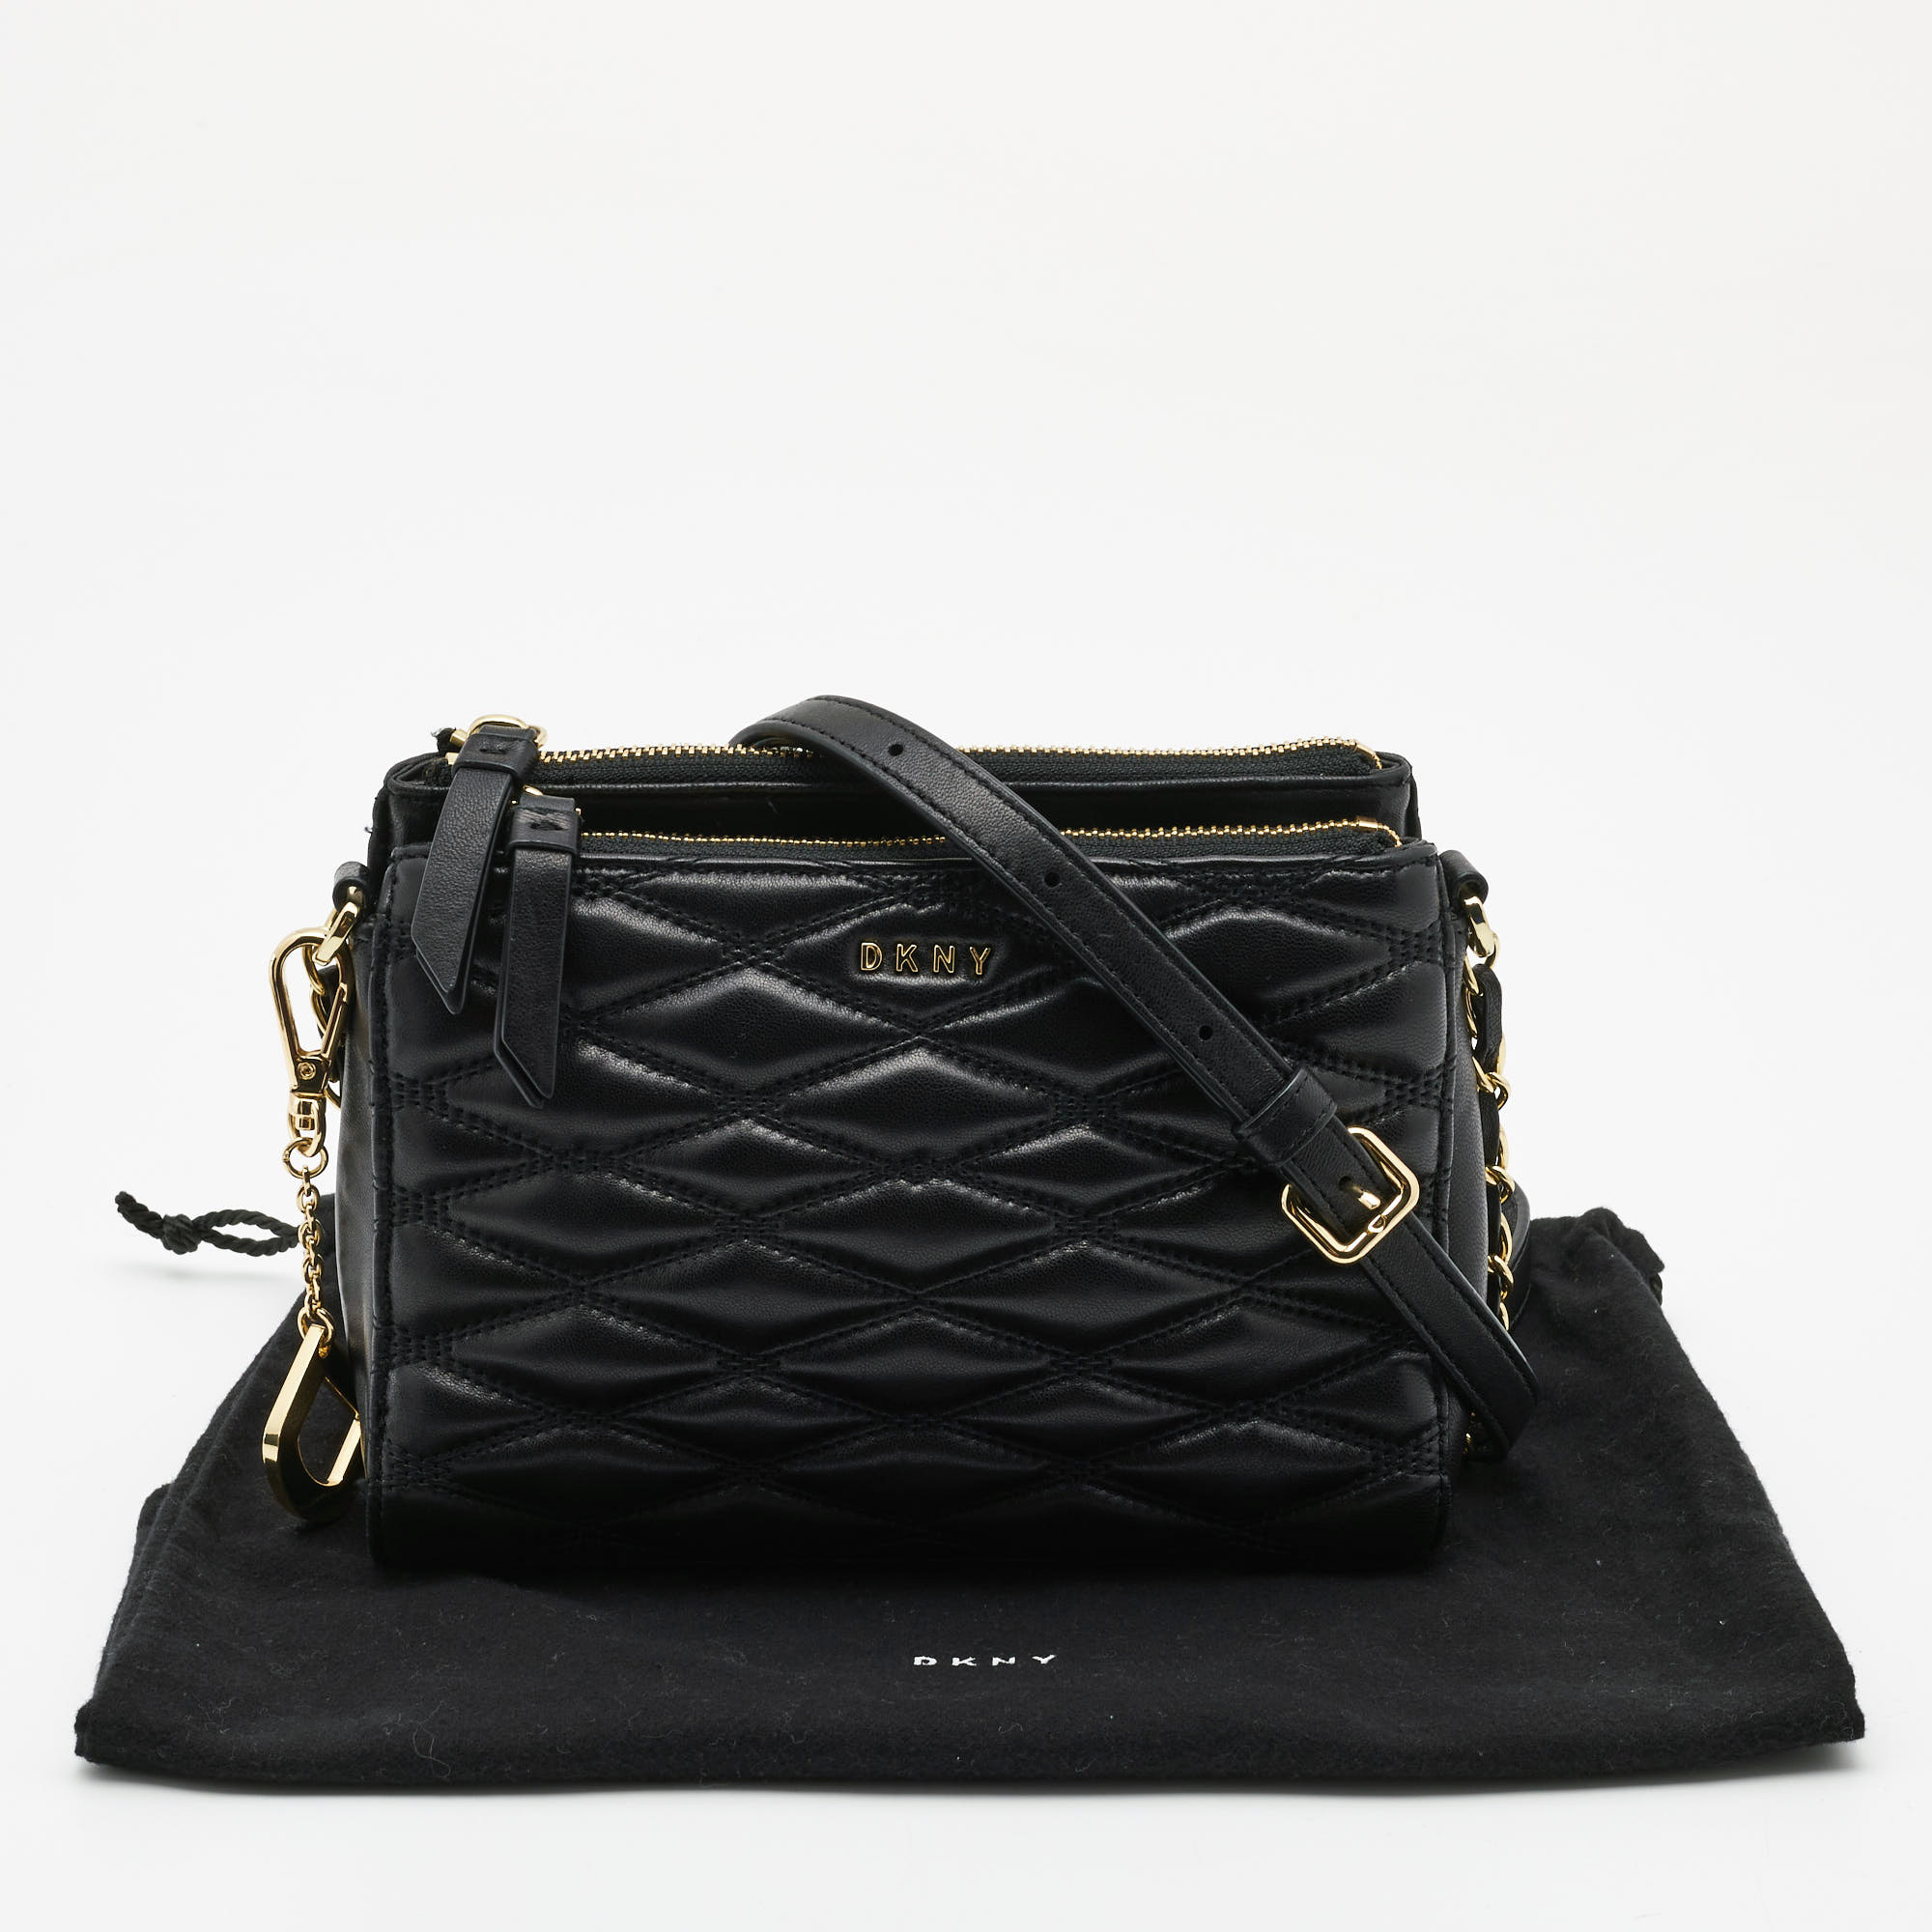 DKNY Black Quilted Leather Crossbody Bag